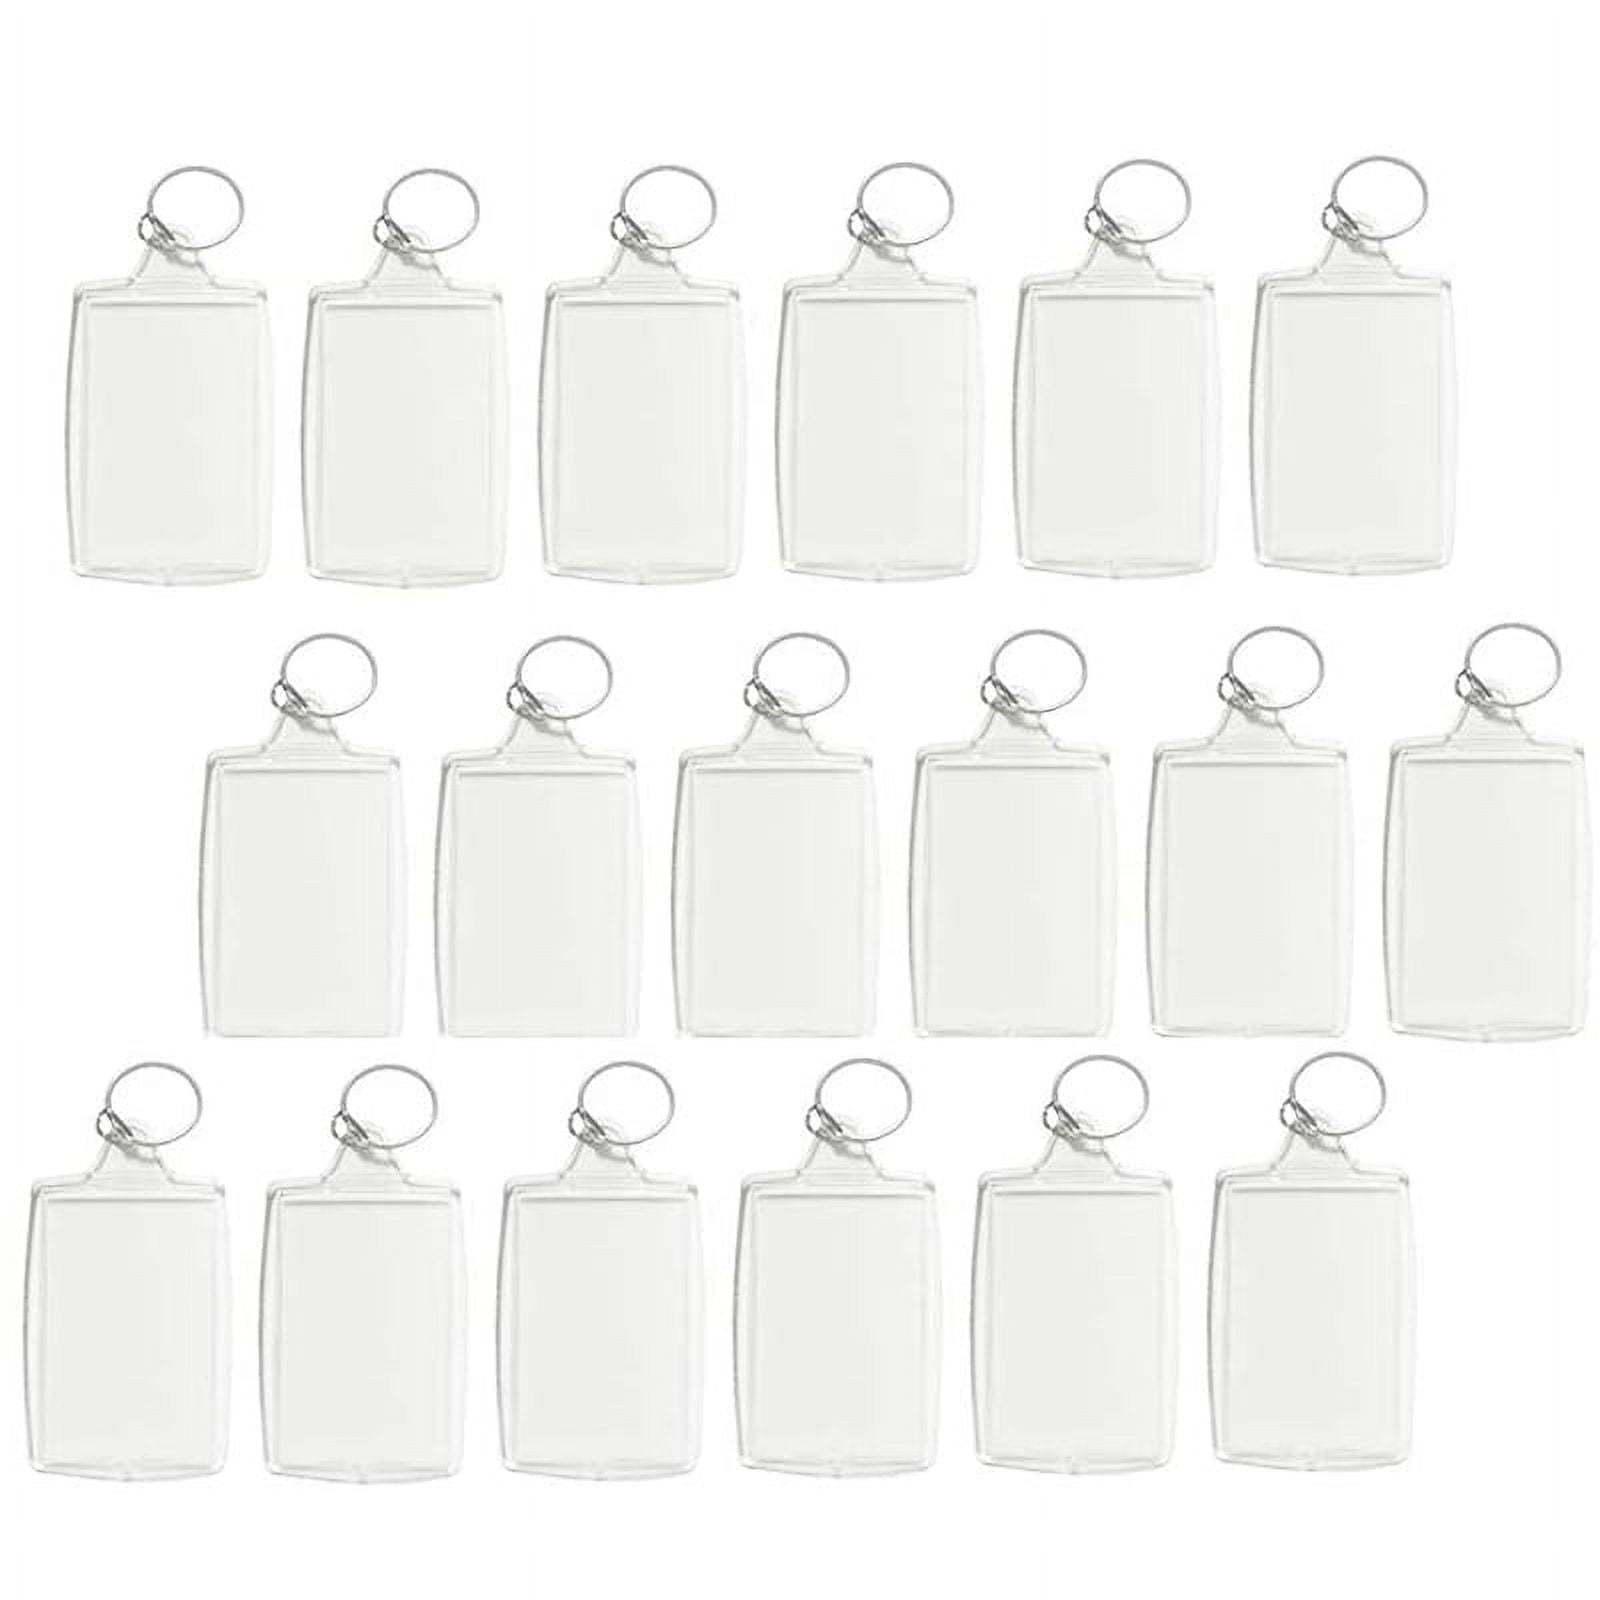 144 Pieces Set Of 2 Inch Acrylic Keychain Blanks, Clear Round Acrylic  Blanks In Bulk With Keychain Rings, Display Cards, Packaging Bags, Jump  Rings, Tassels, Suitable For Vinyl Diy Keychain Earrings And